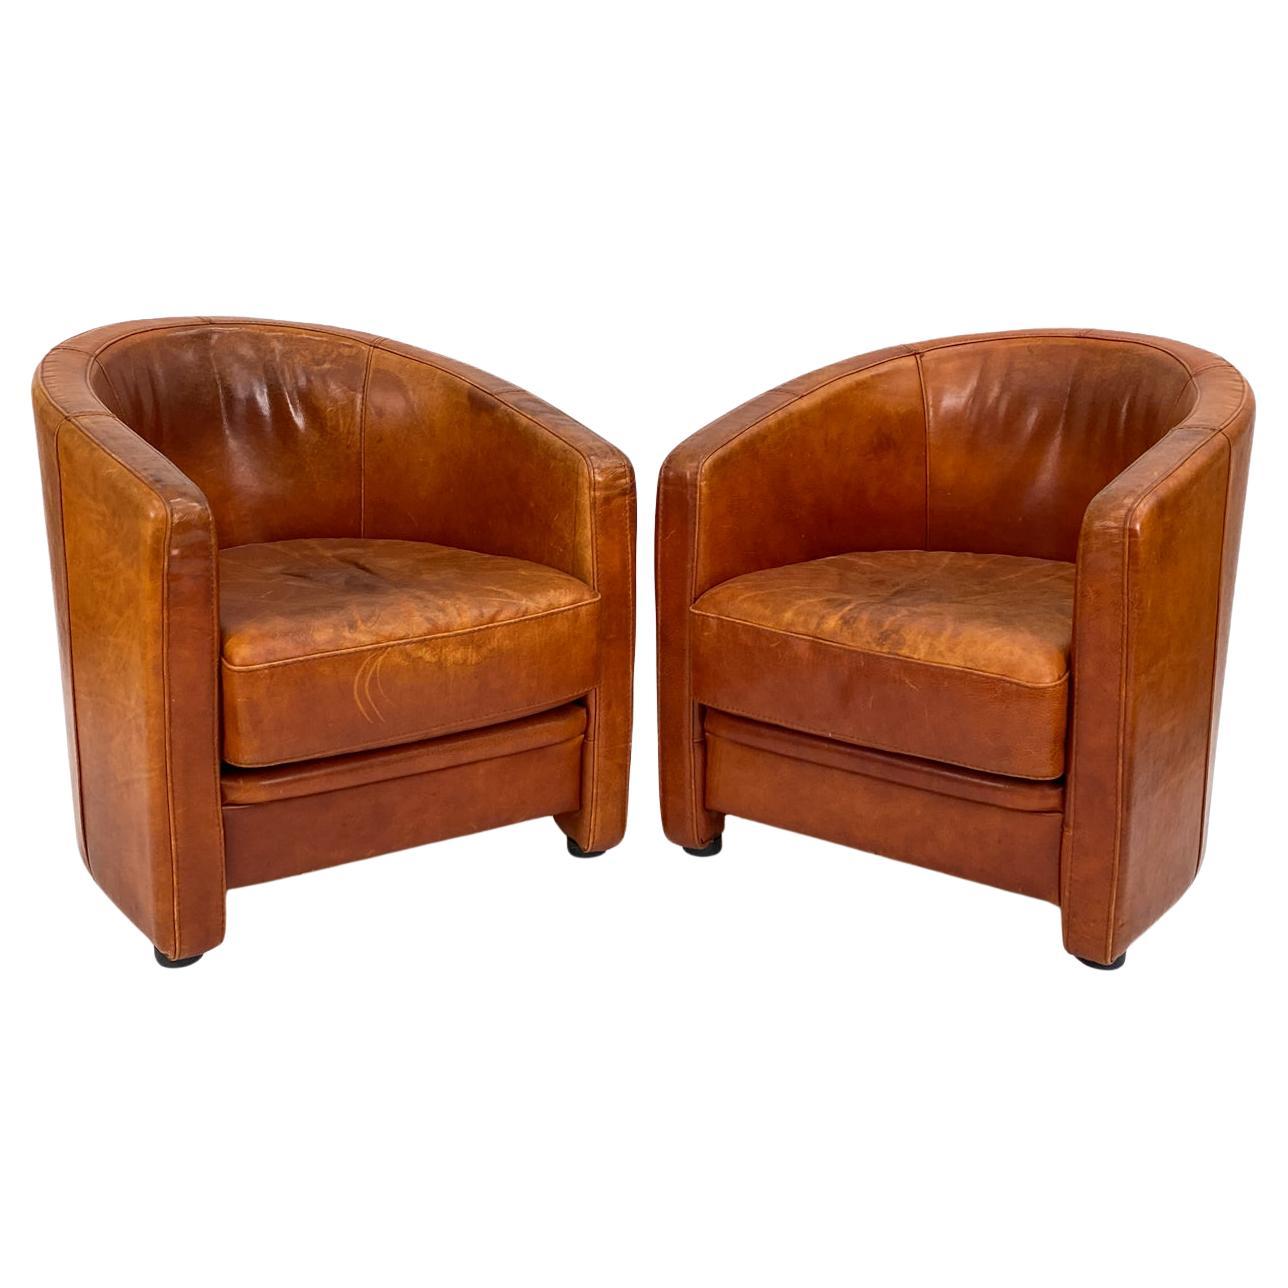 Pair of Art Deco-Style Club Chairs in Patinated Leather, Attributed to Anton Dam